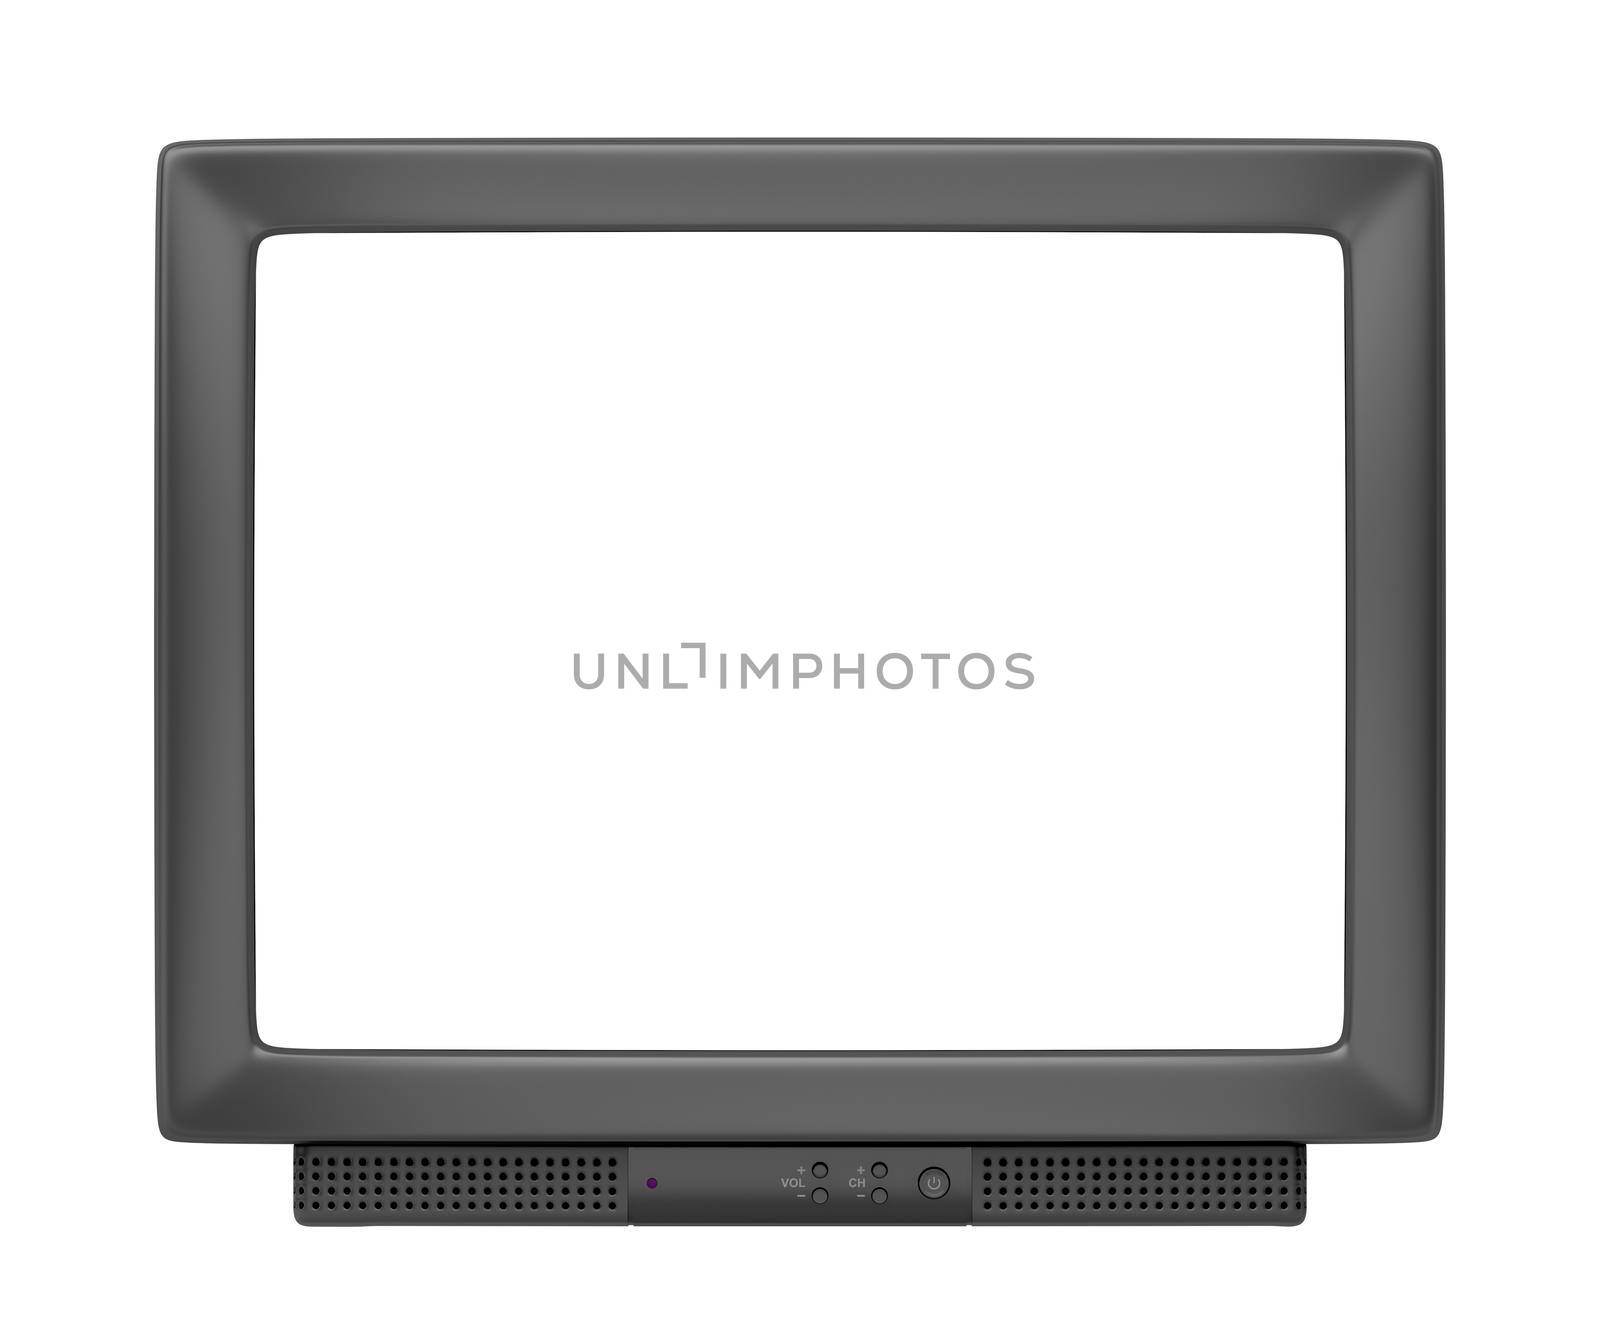 CRT TV with empty screen isolated on white background, front view